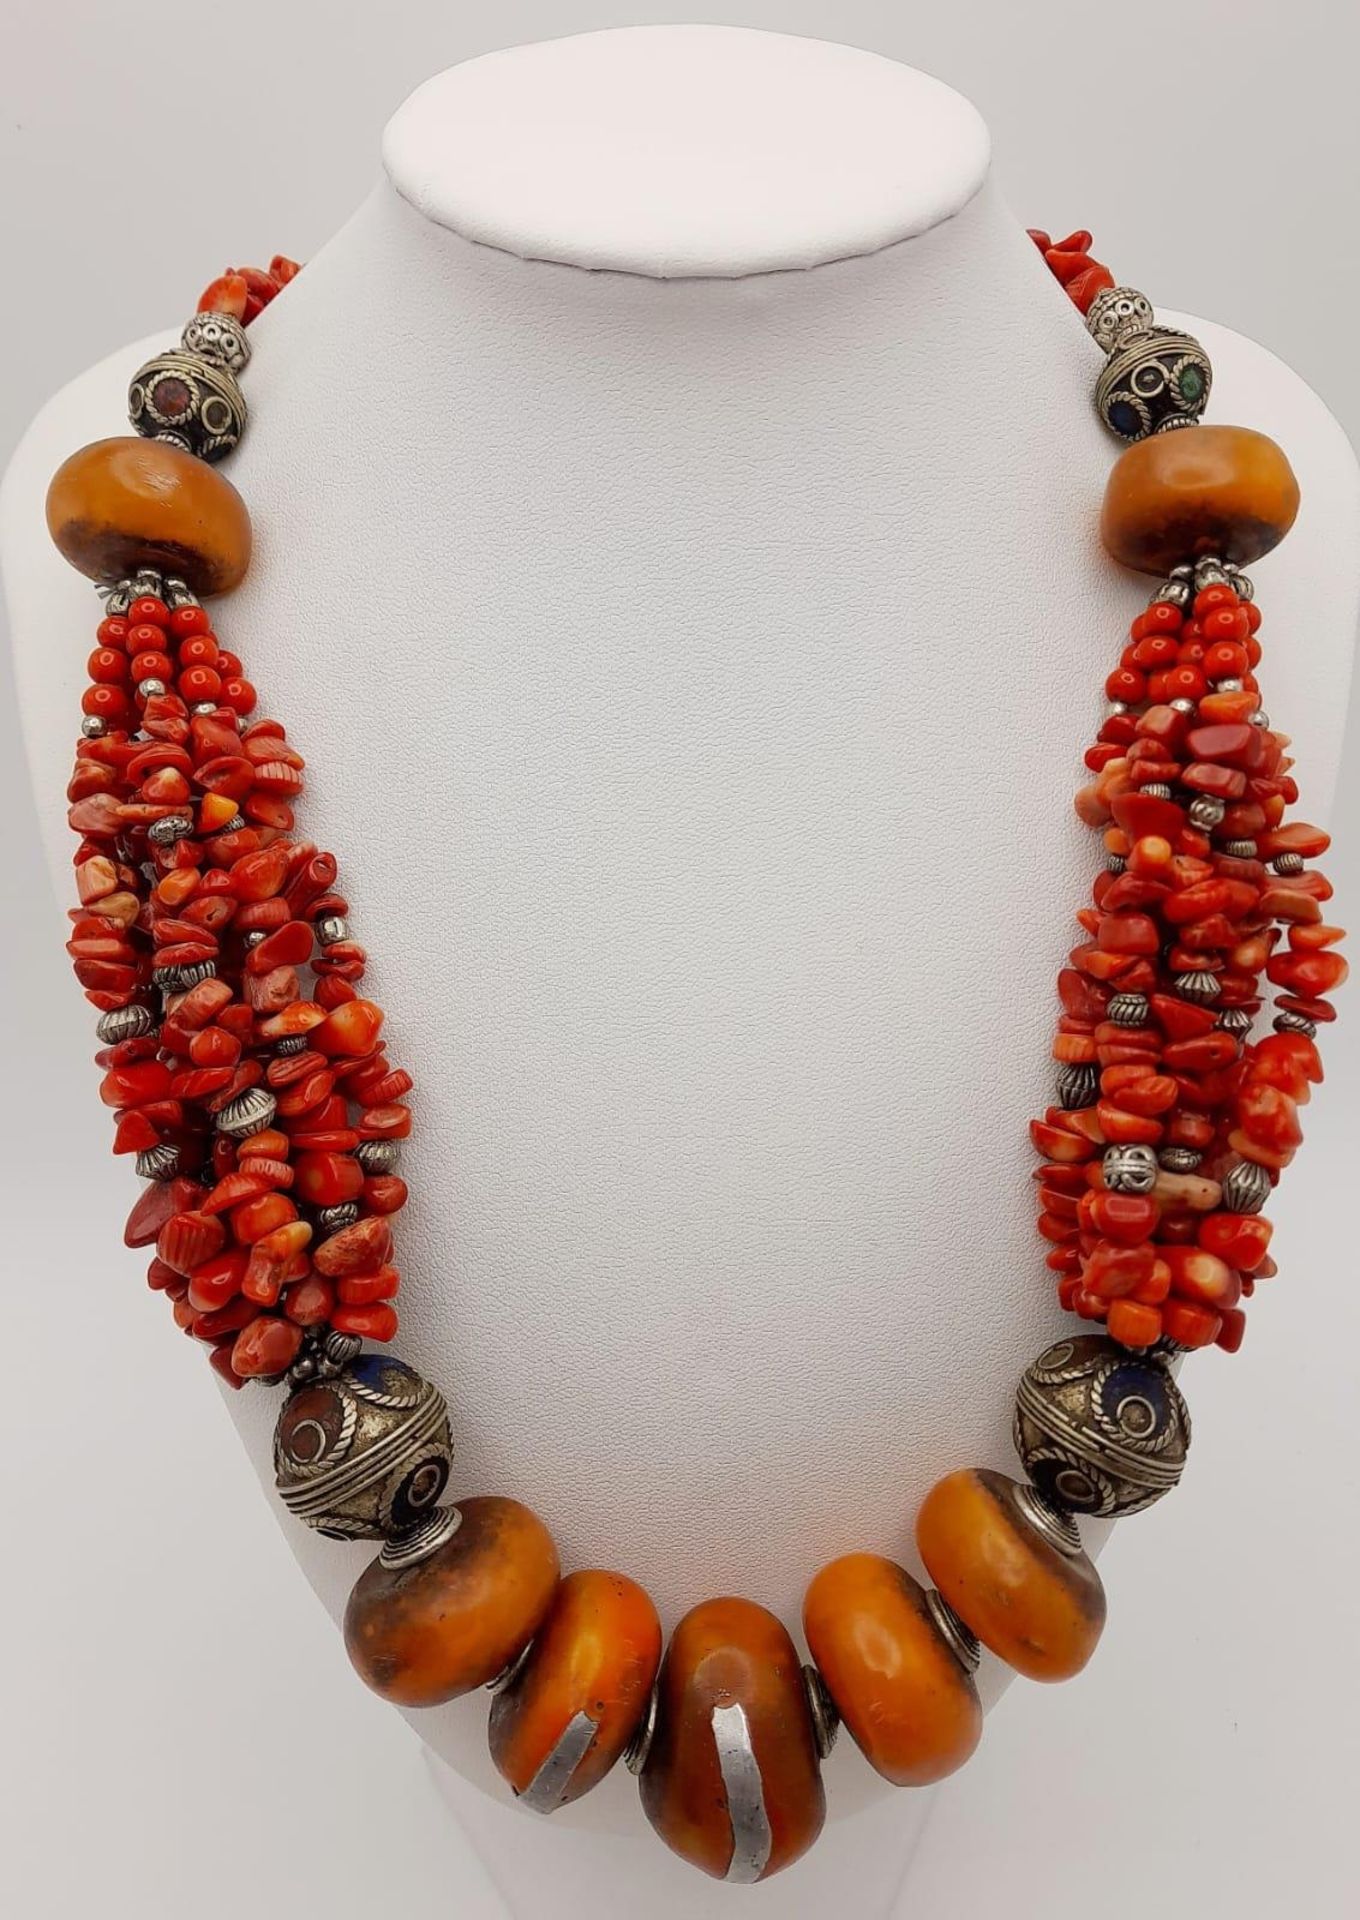 A Vintage Moroccan Berber Amber and Coral Necklace plus a pair of Amber Earrings. Necklace - Image 2 of 5